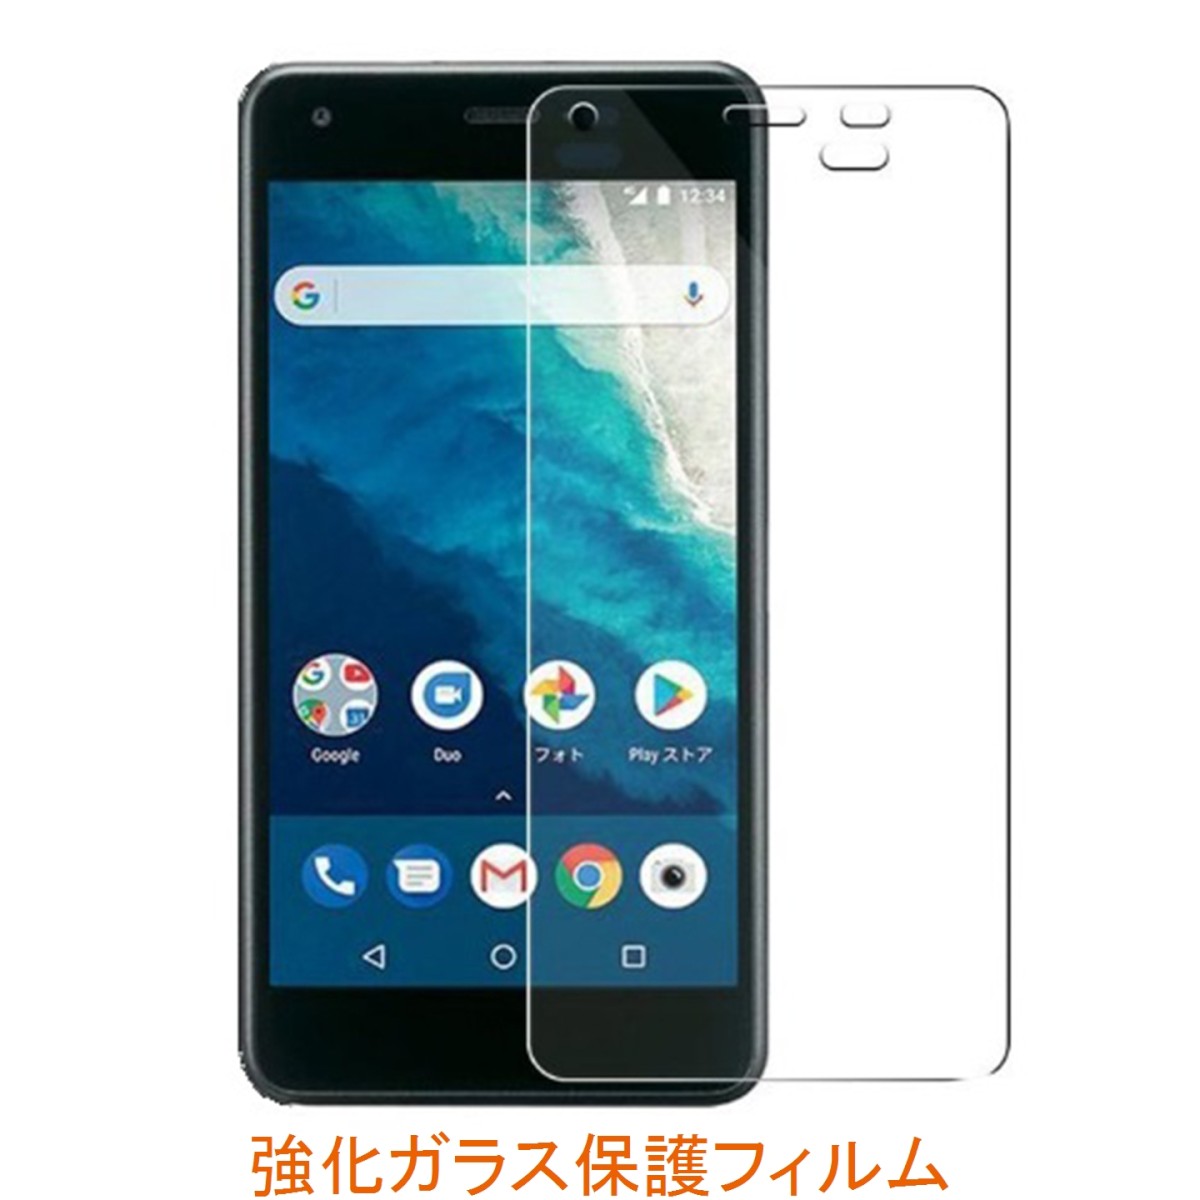 【62%OFF!】 爆売り ゆうパケット送料無料 ワイモバイル Android One S4 DIGNO J 704KC 9H 0.3mm 強化ガラス 液晶保護フィルム 2.5D getsvms.com getsvms.com